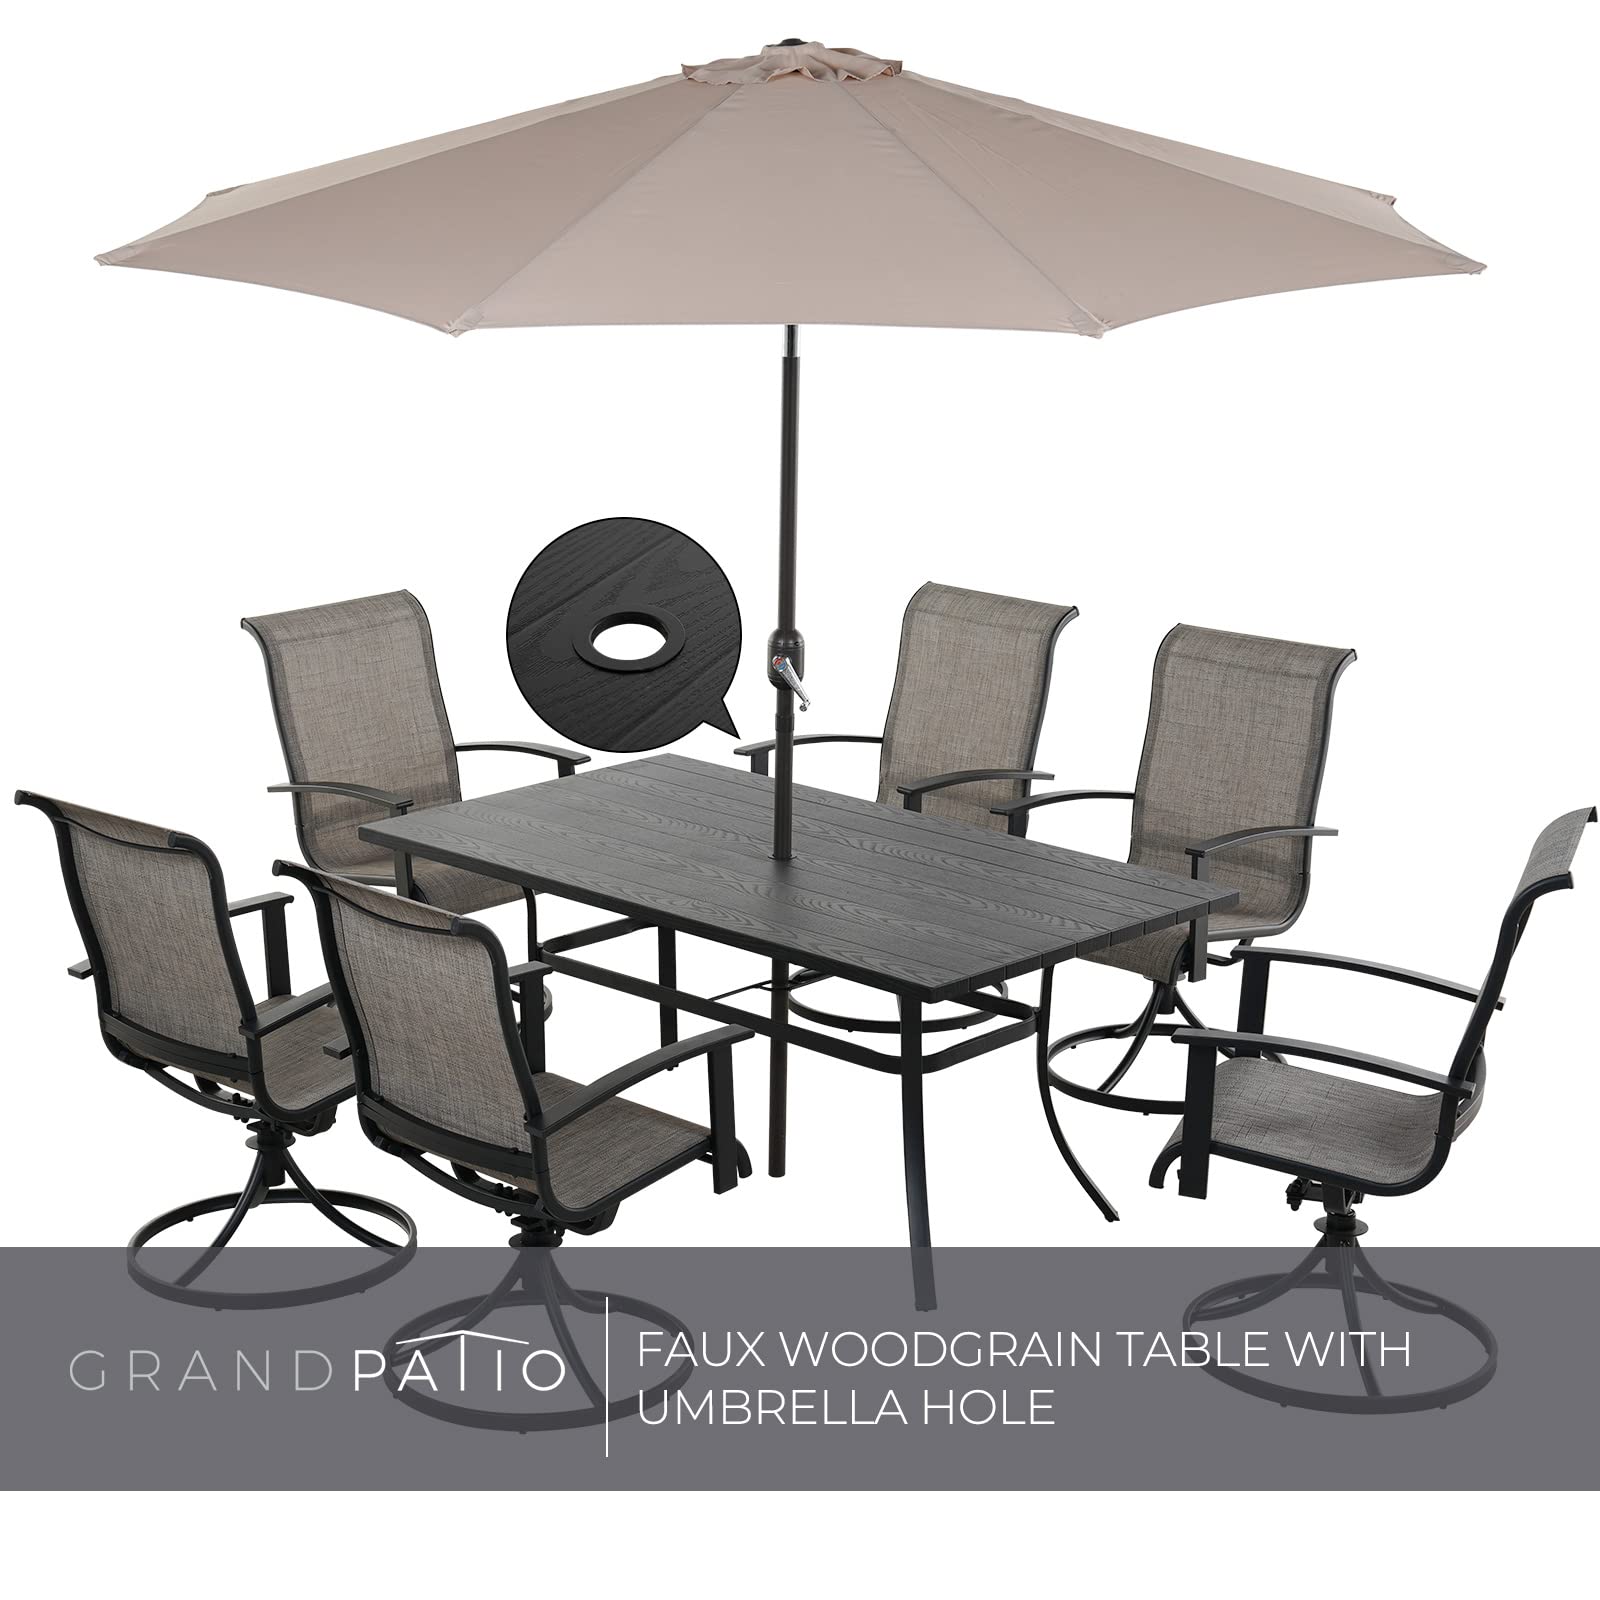 Grand patio Outdoor Swivel Dining Set of 7, 6-Piece Mesh Sling Rocking Chairs, 1-Piece Large Woodgrain Rectangular Steel Dining Table with Umbrella Hole, Mixed Coffee